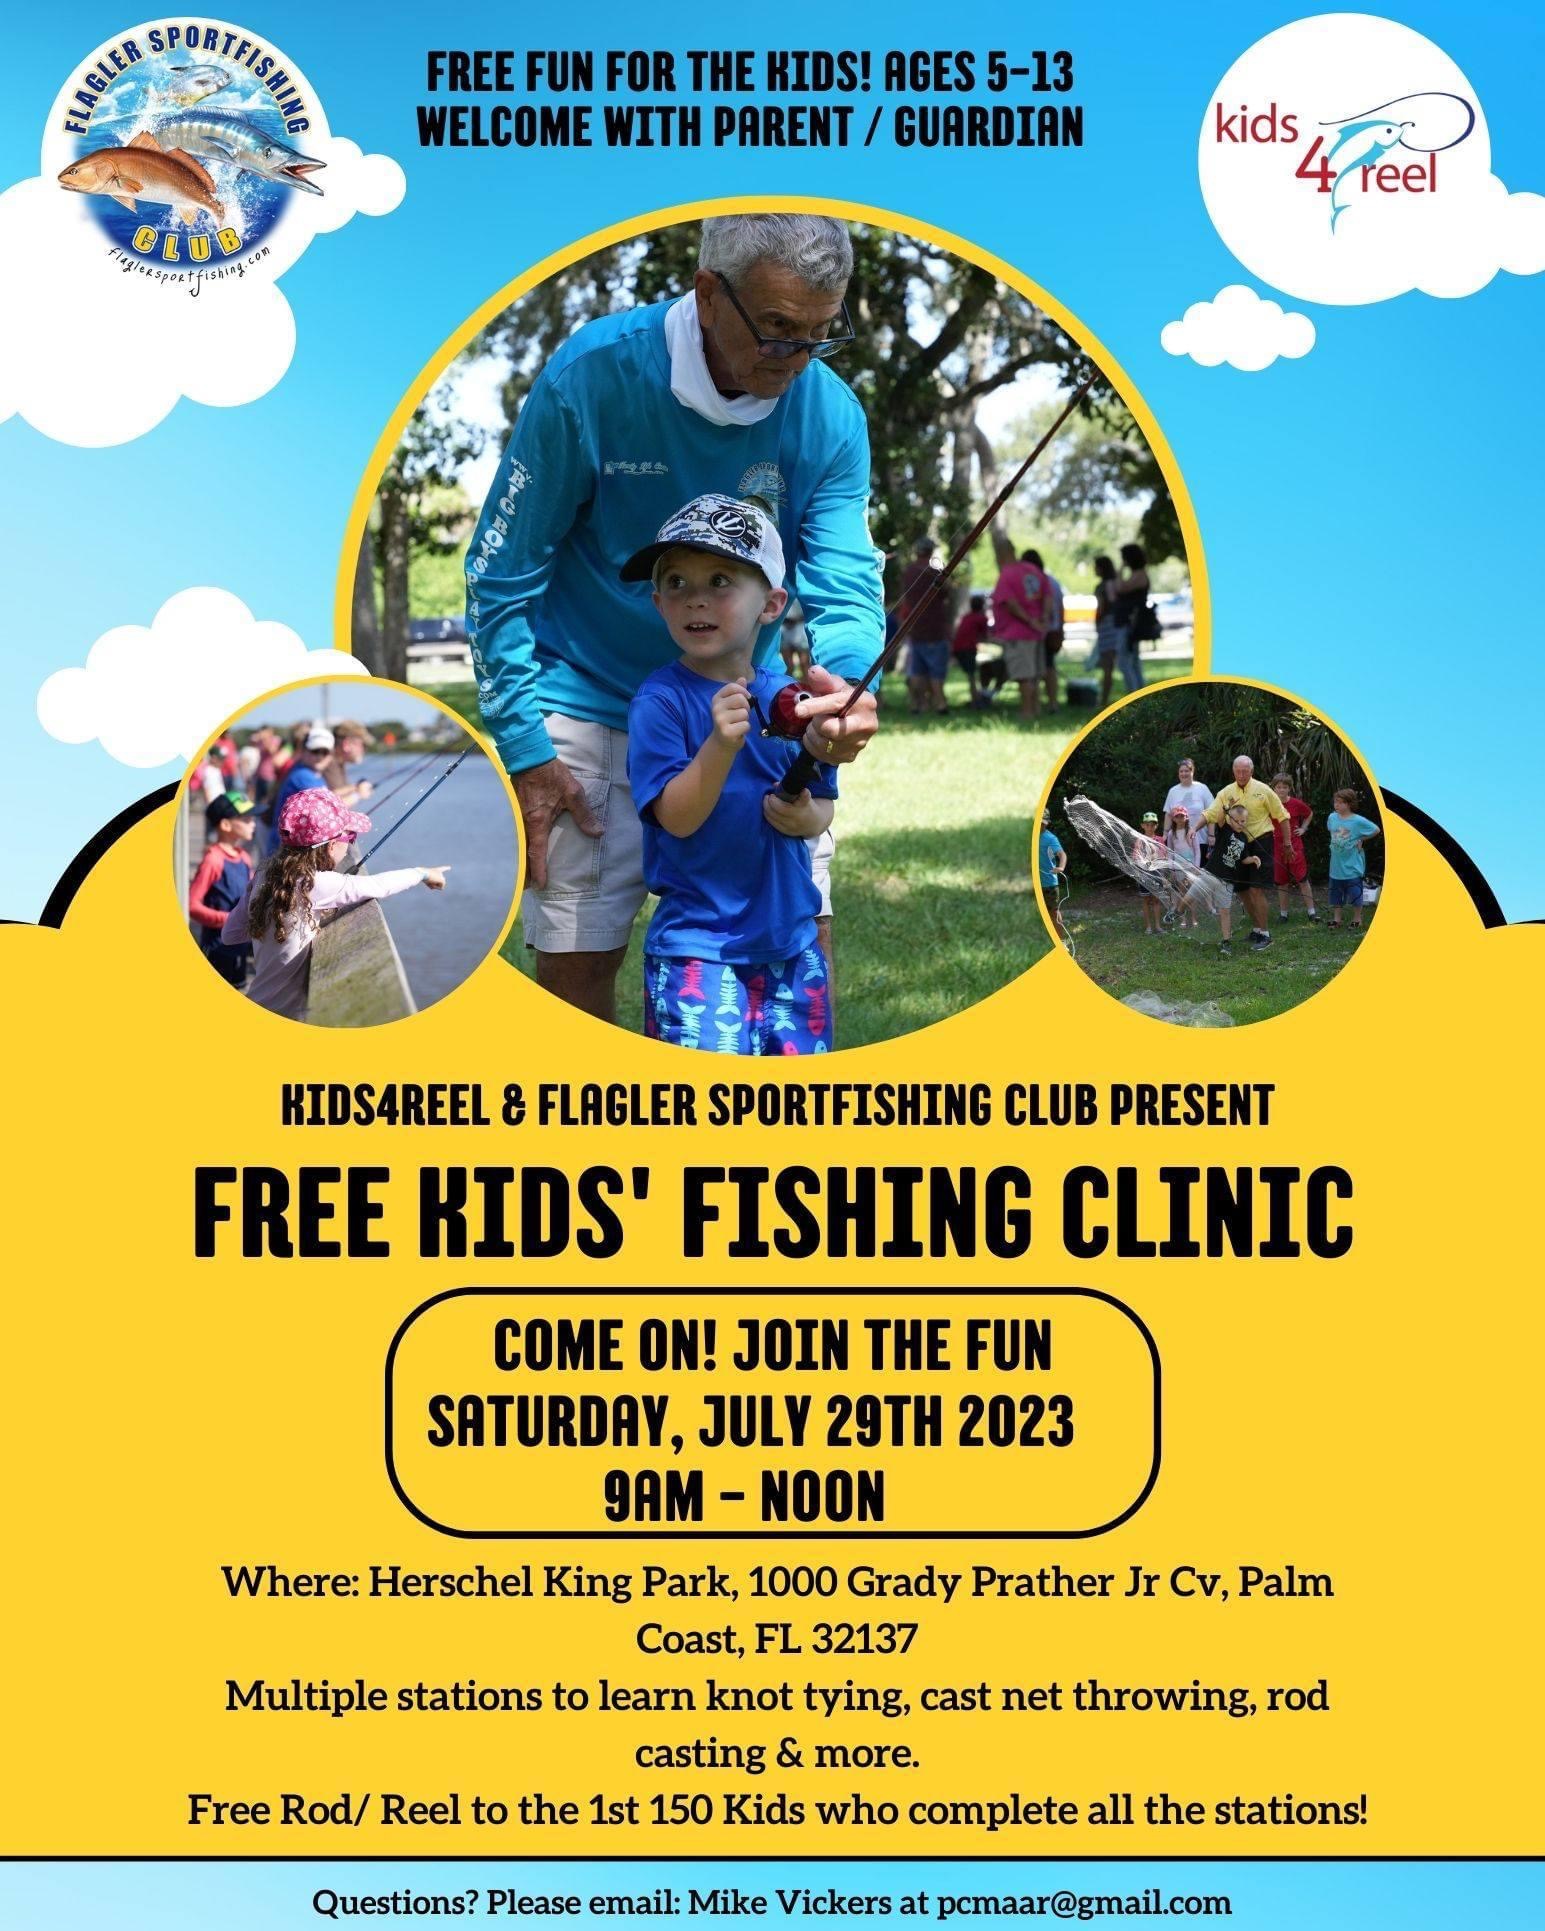 Flagler Sportfishing Club Hosts Exciting Free Kids Fishing Clinic at  Herschel King Park July 29 - Flagler News Weekly